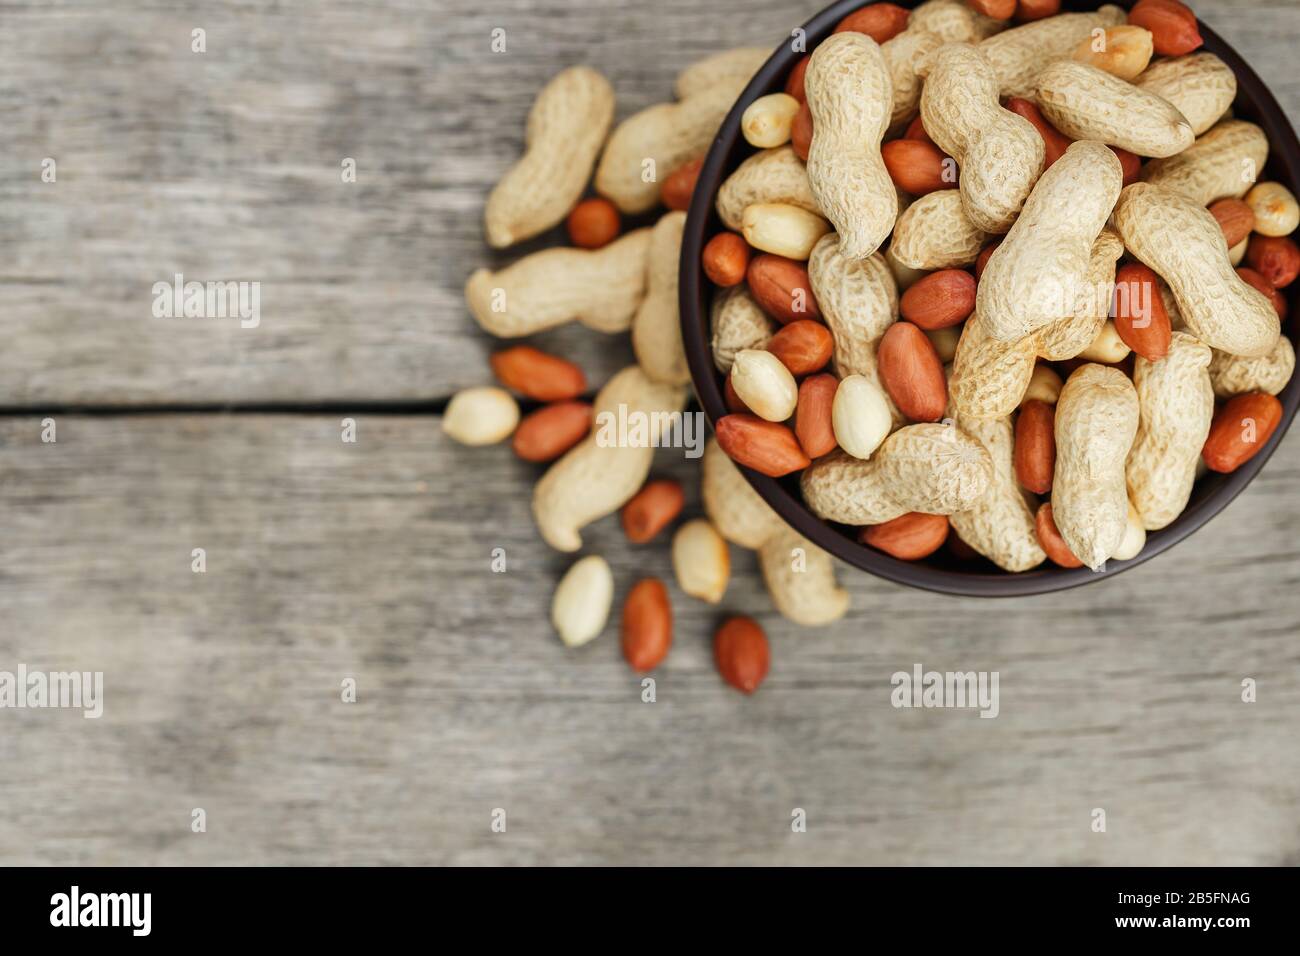 Roasted peanuts in their shells and peeled in a brown cup, against a gray wooden table. Organic vegetarian protein, macro. Stock Photo